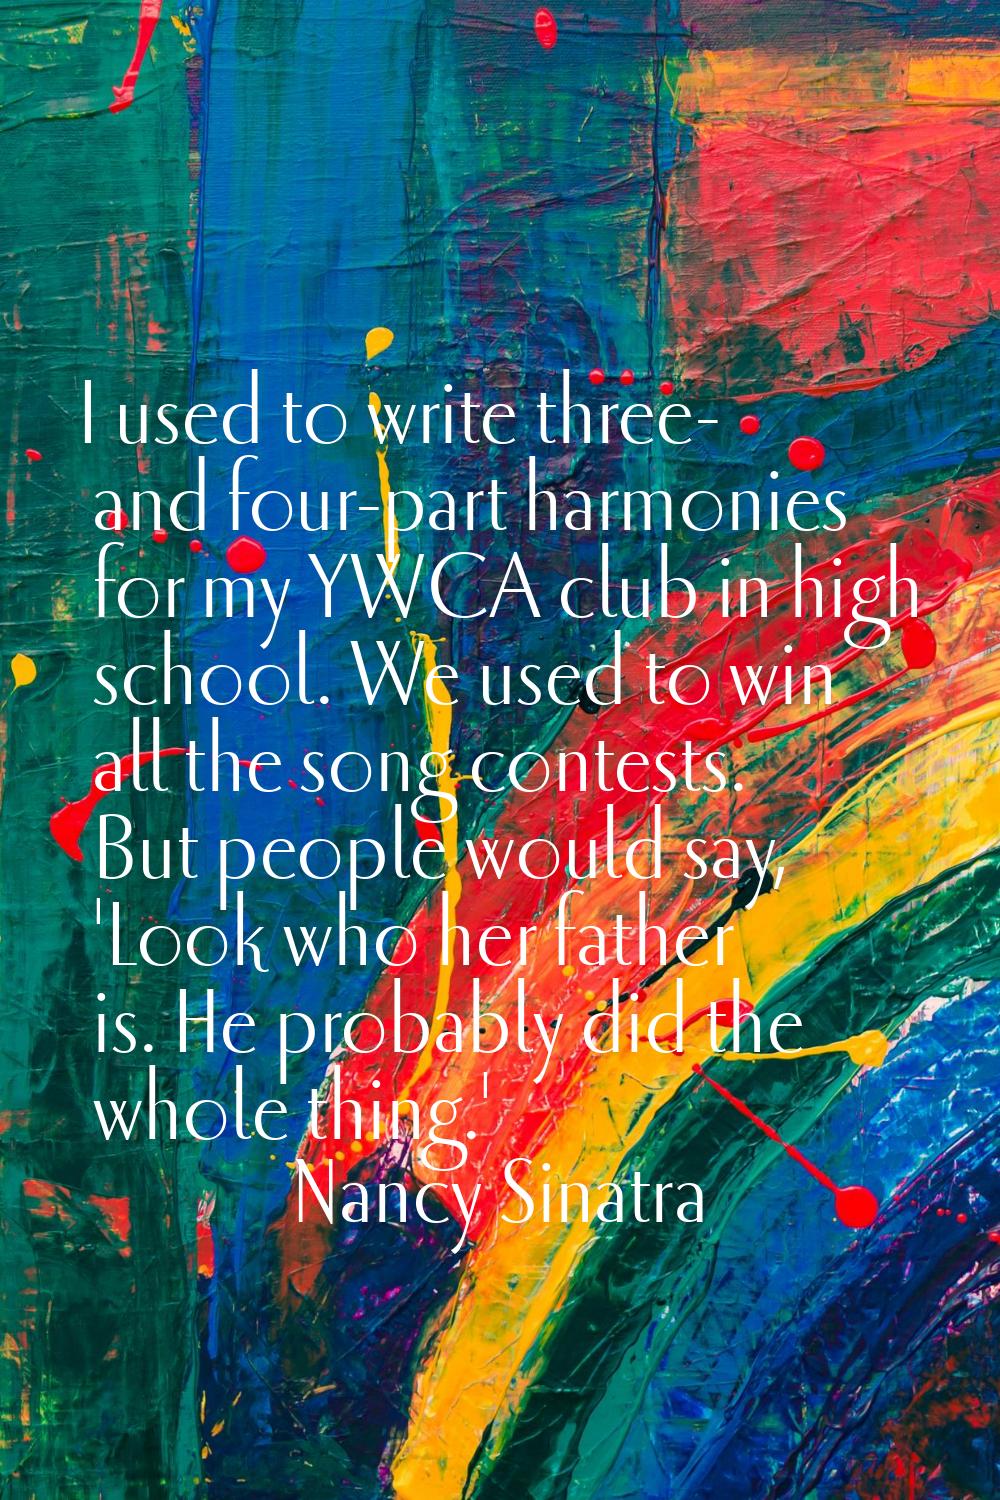 I used to write three- and four-part harmonies for my YWCA club in high school. We used to win all 